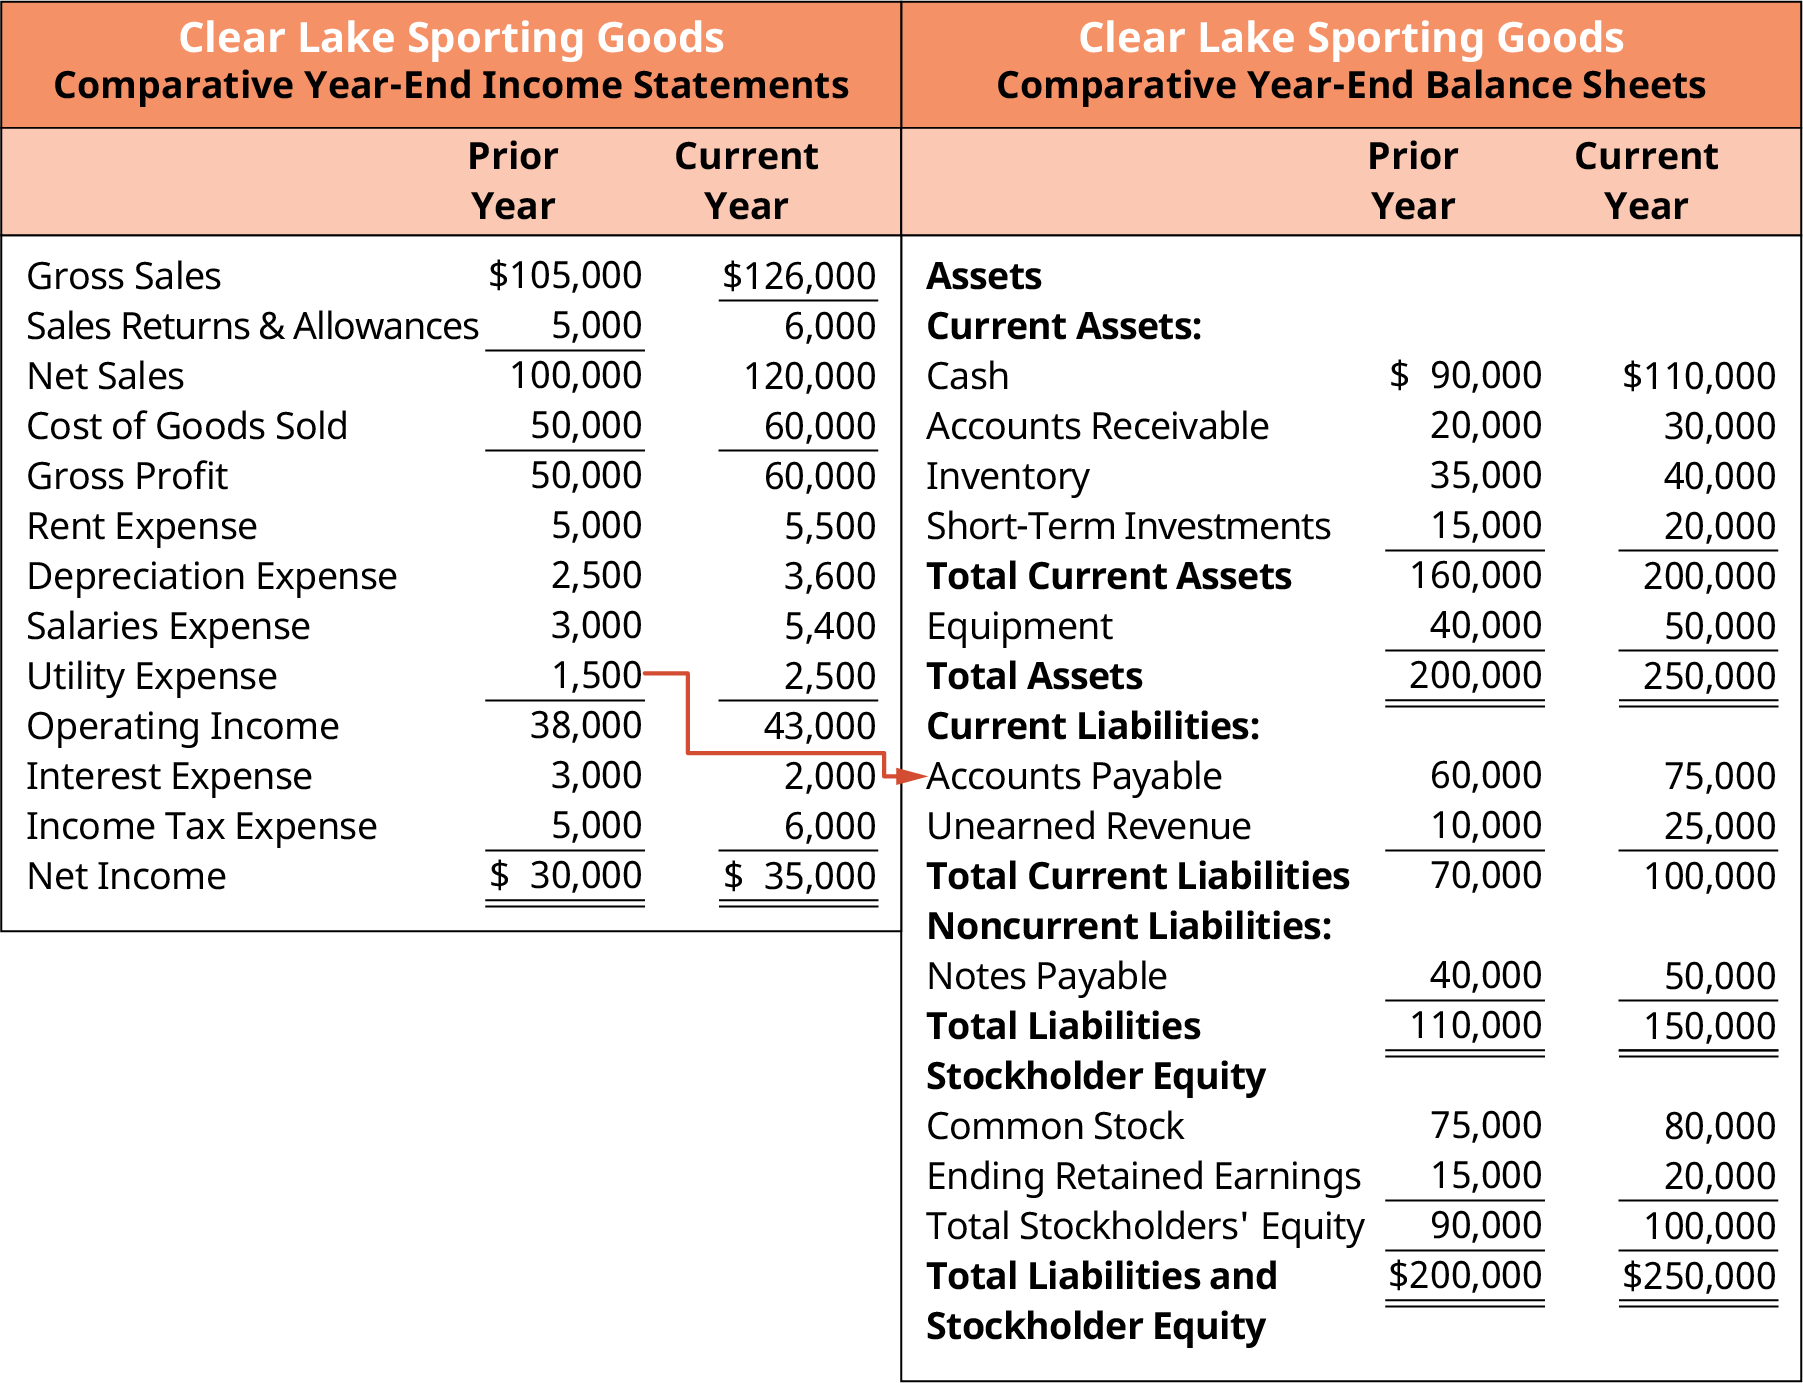 Connections between Clear Lake Sporting Goods’ Expenses and Accounts Payable. It shows that there is a relationship between the utility expense of $1,500 from the income statement and the accounts payable from the balance sheet.